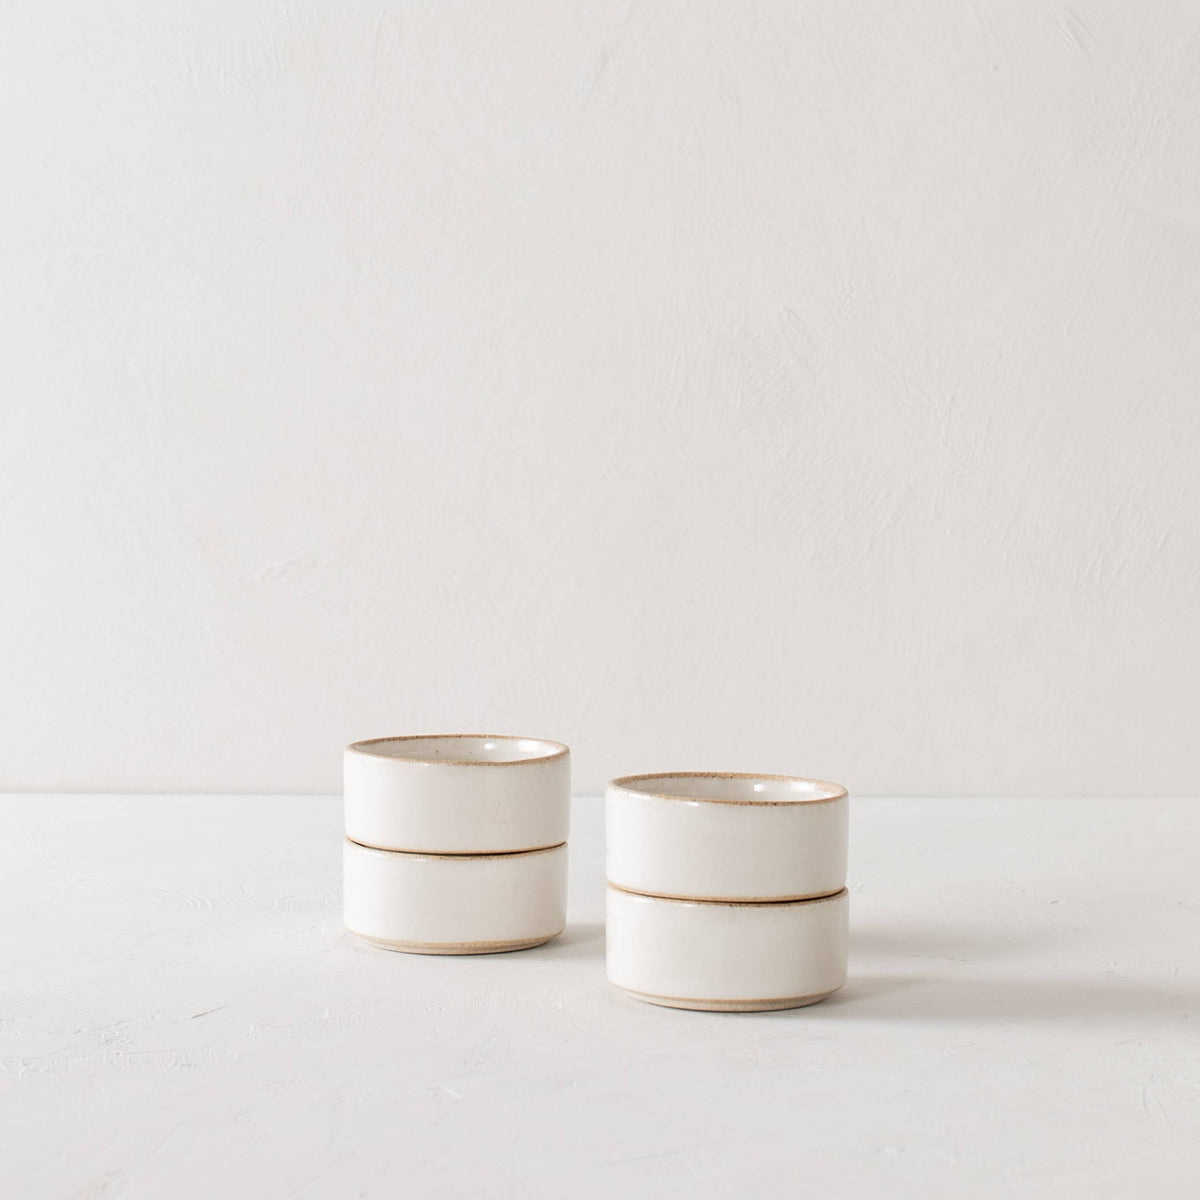 Handmade sand stoneware with an ivory glaze. Perfect for the minimalist who loves functionality.